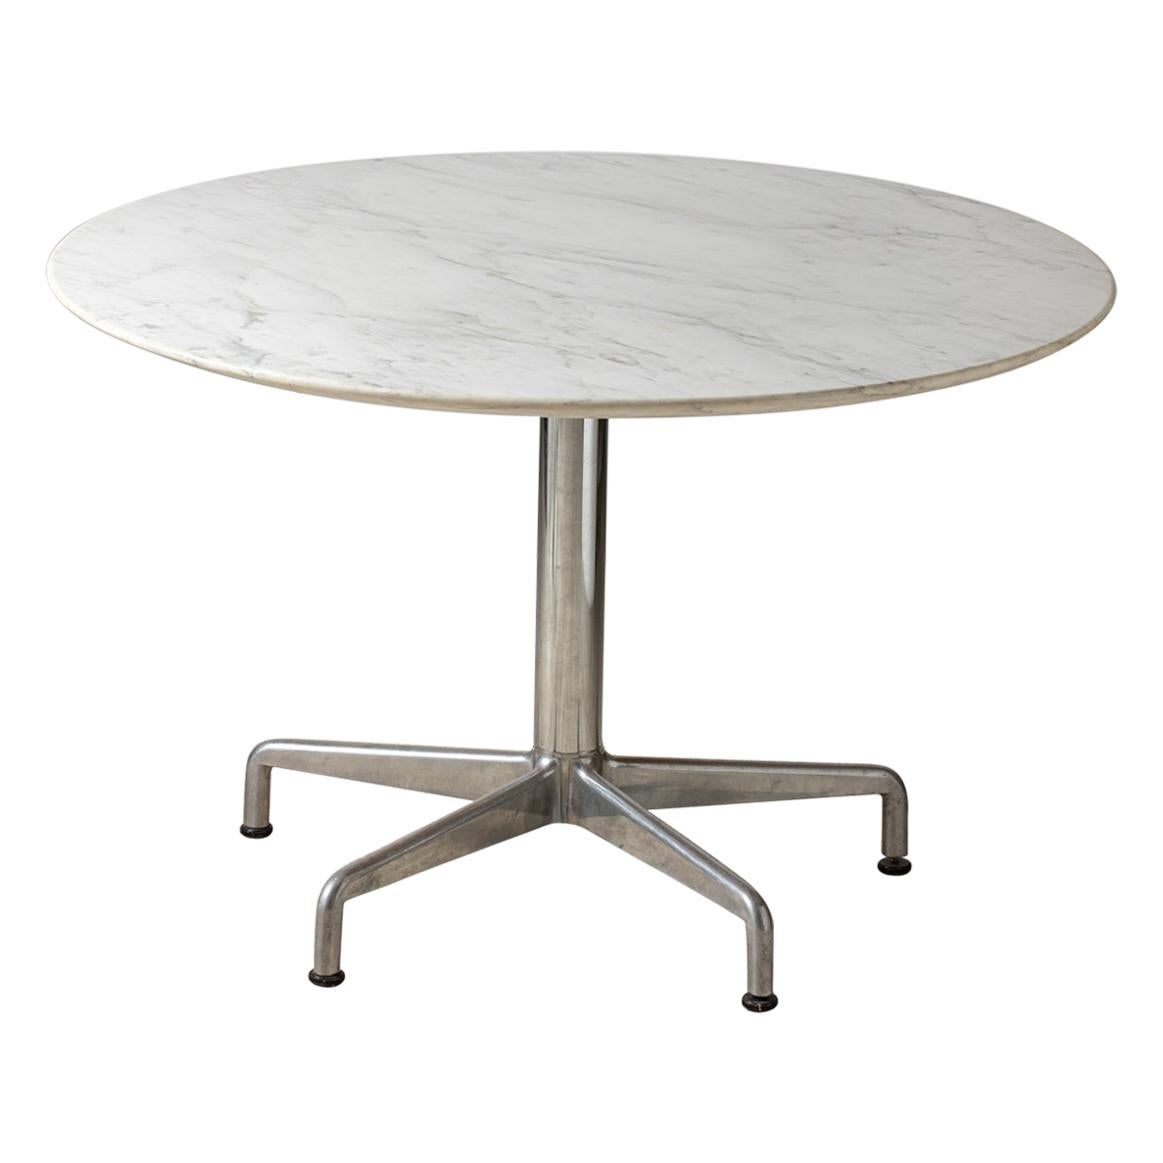 Charles Eames for Knoll, Round Segmented Dining Table, circa 1964 For Sale